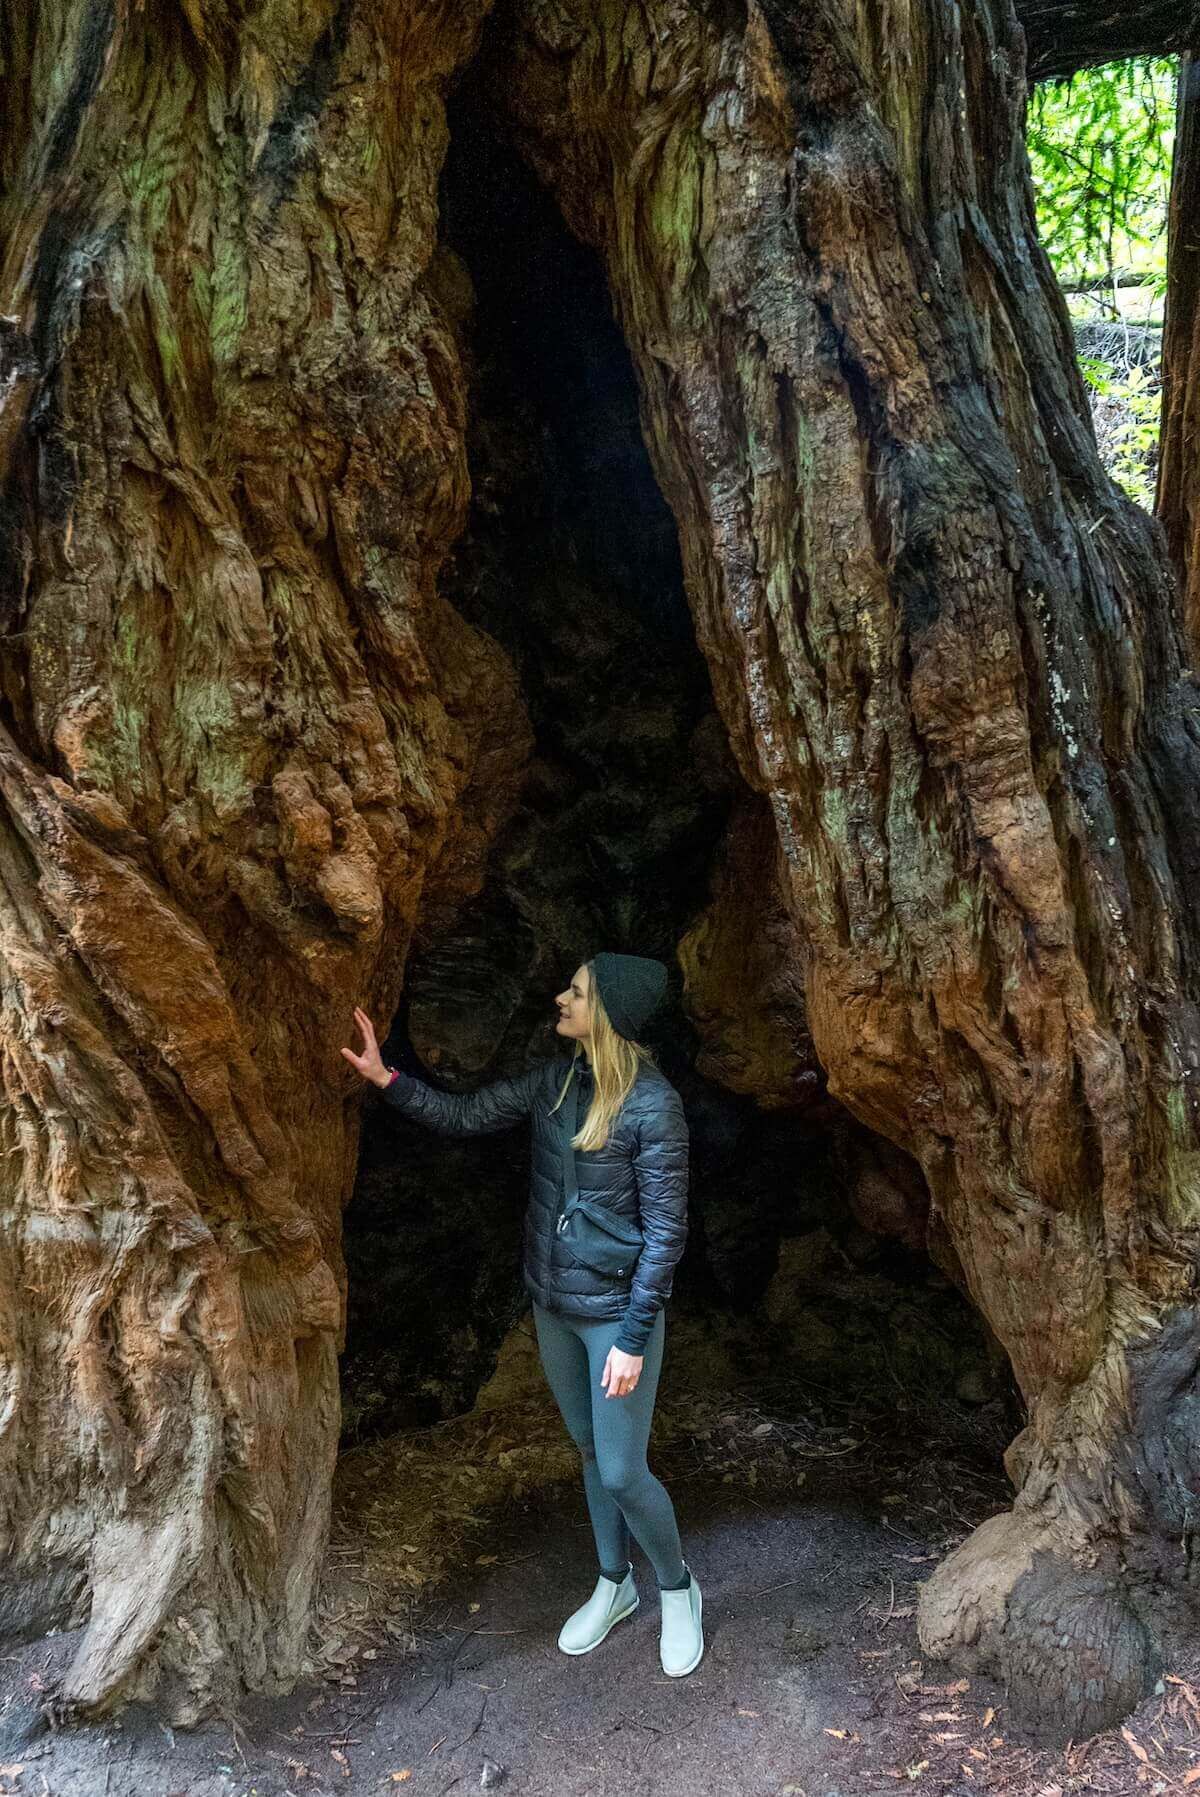 A woman stands inside an alcove in a massive redwood tree in Muir Woods National Monument.